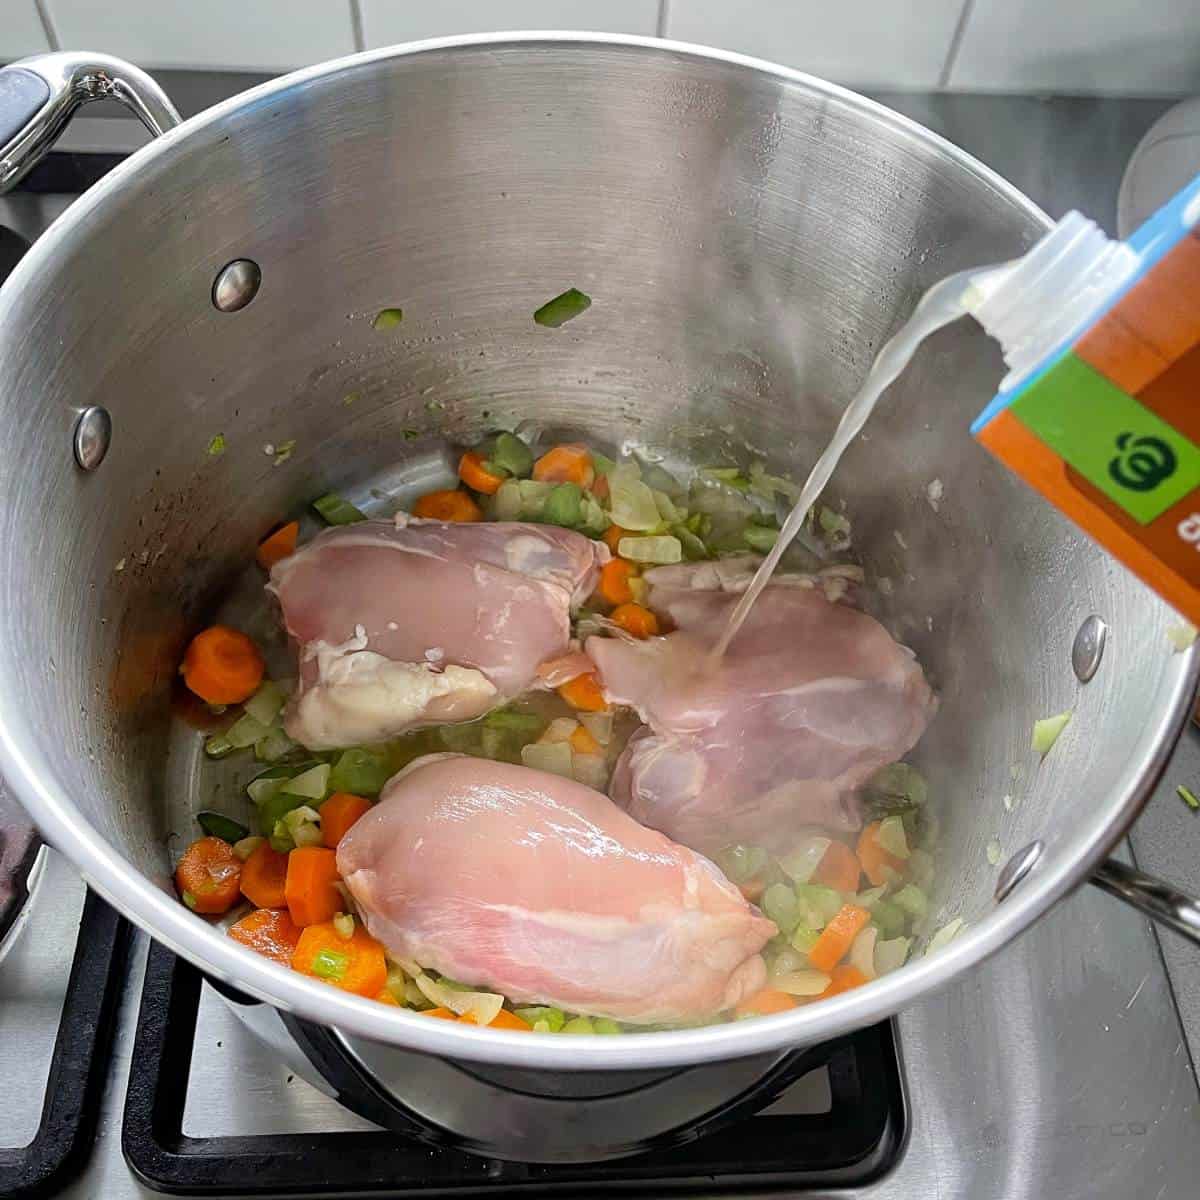 Stock being poured into a large pot containing chicken and vegetables.